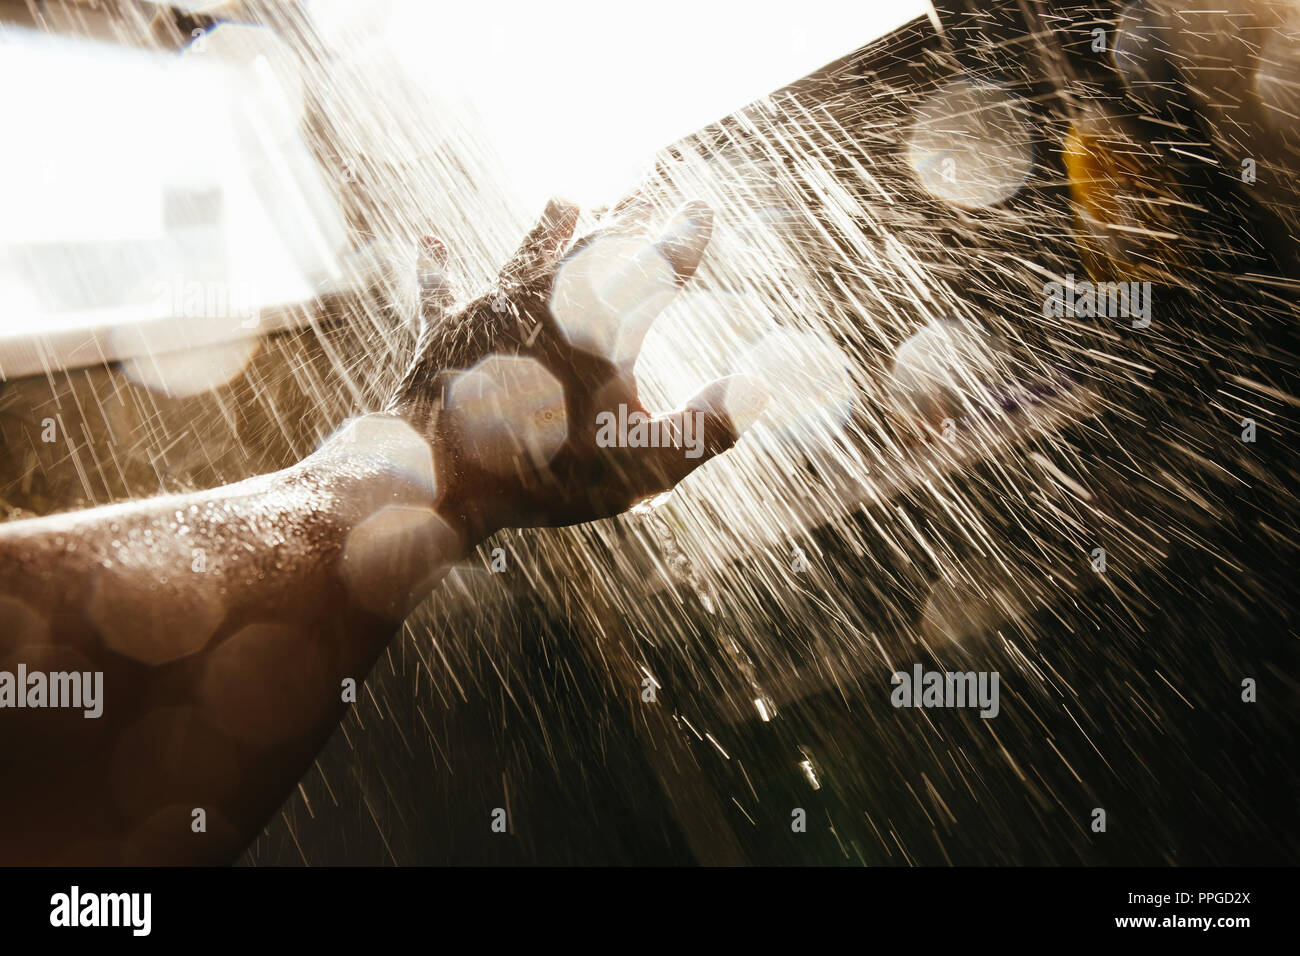 A man's hand in a spray of water in the sunlight against a dark background. Water as a symbol of purity and life. Stock Photo